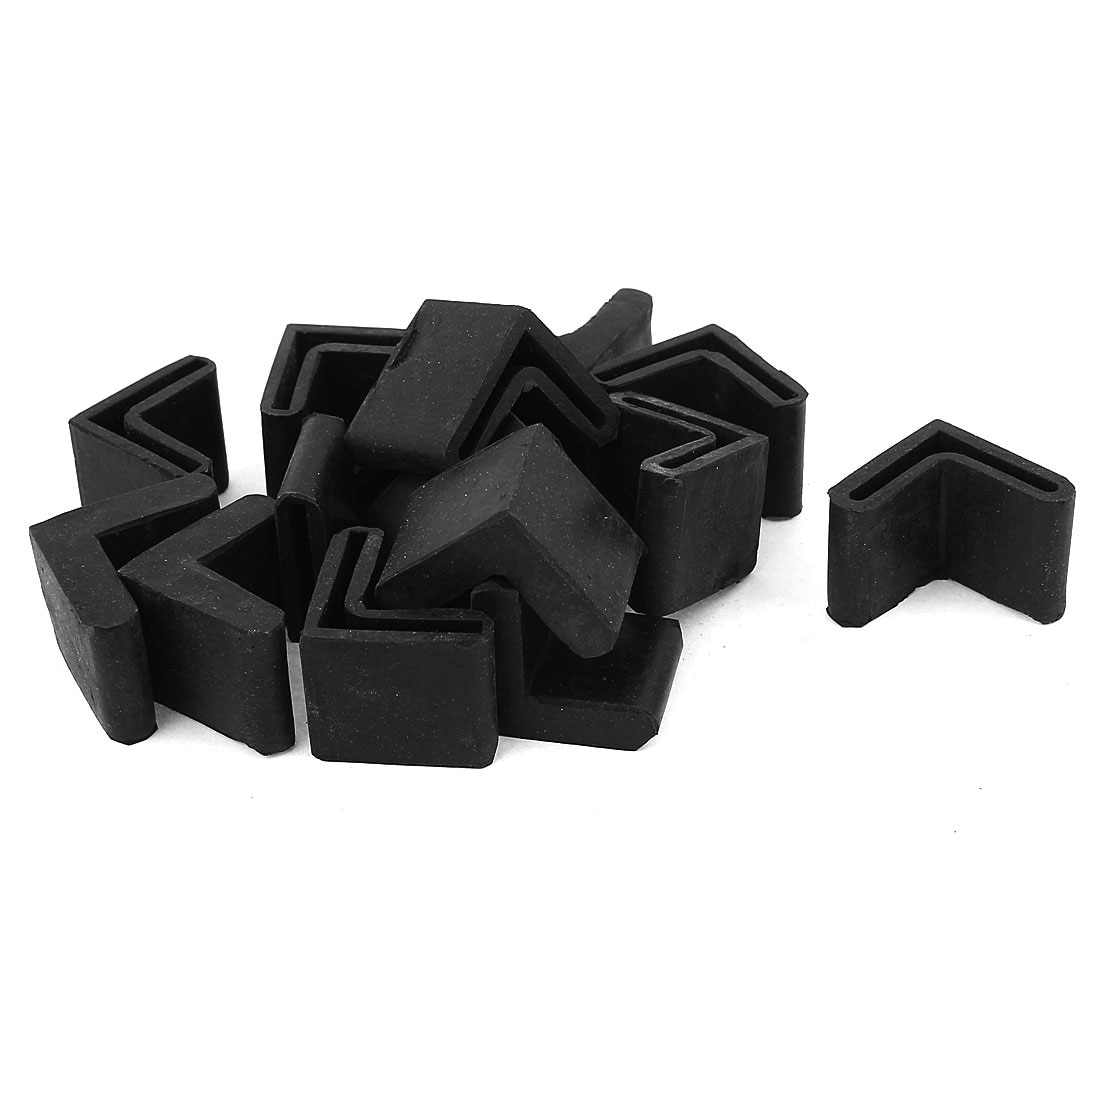 Felt Furniture Pads, 50pcs 25mm Round Pads Self-Adhesive Heavy Duty Felt  Fiber Pads for Chair Table Sofa Legs Floor Protection - Black